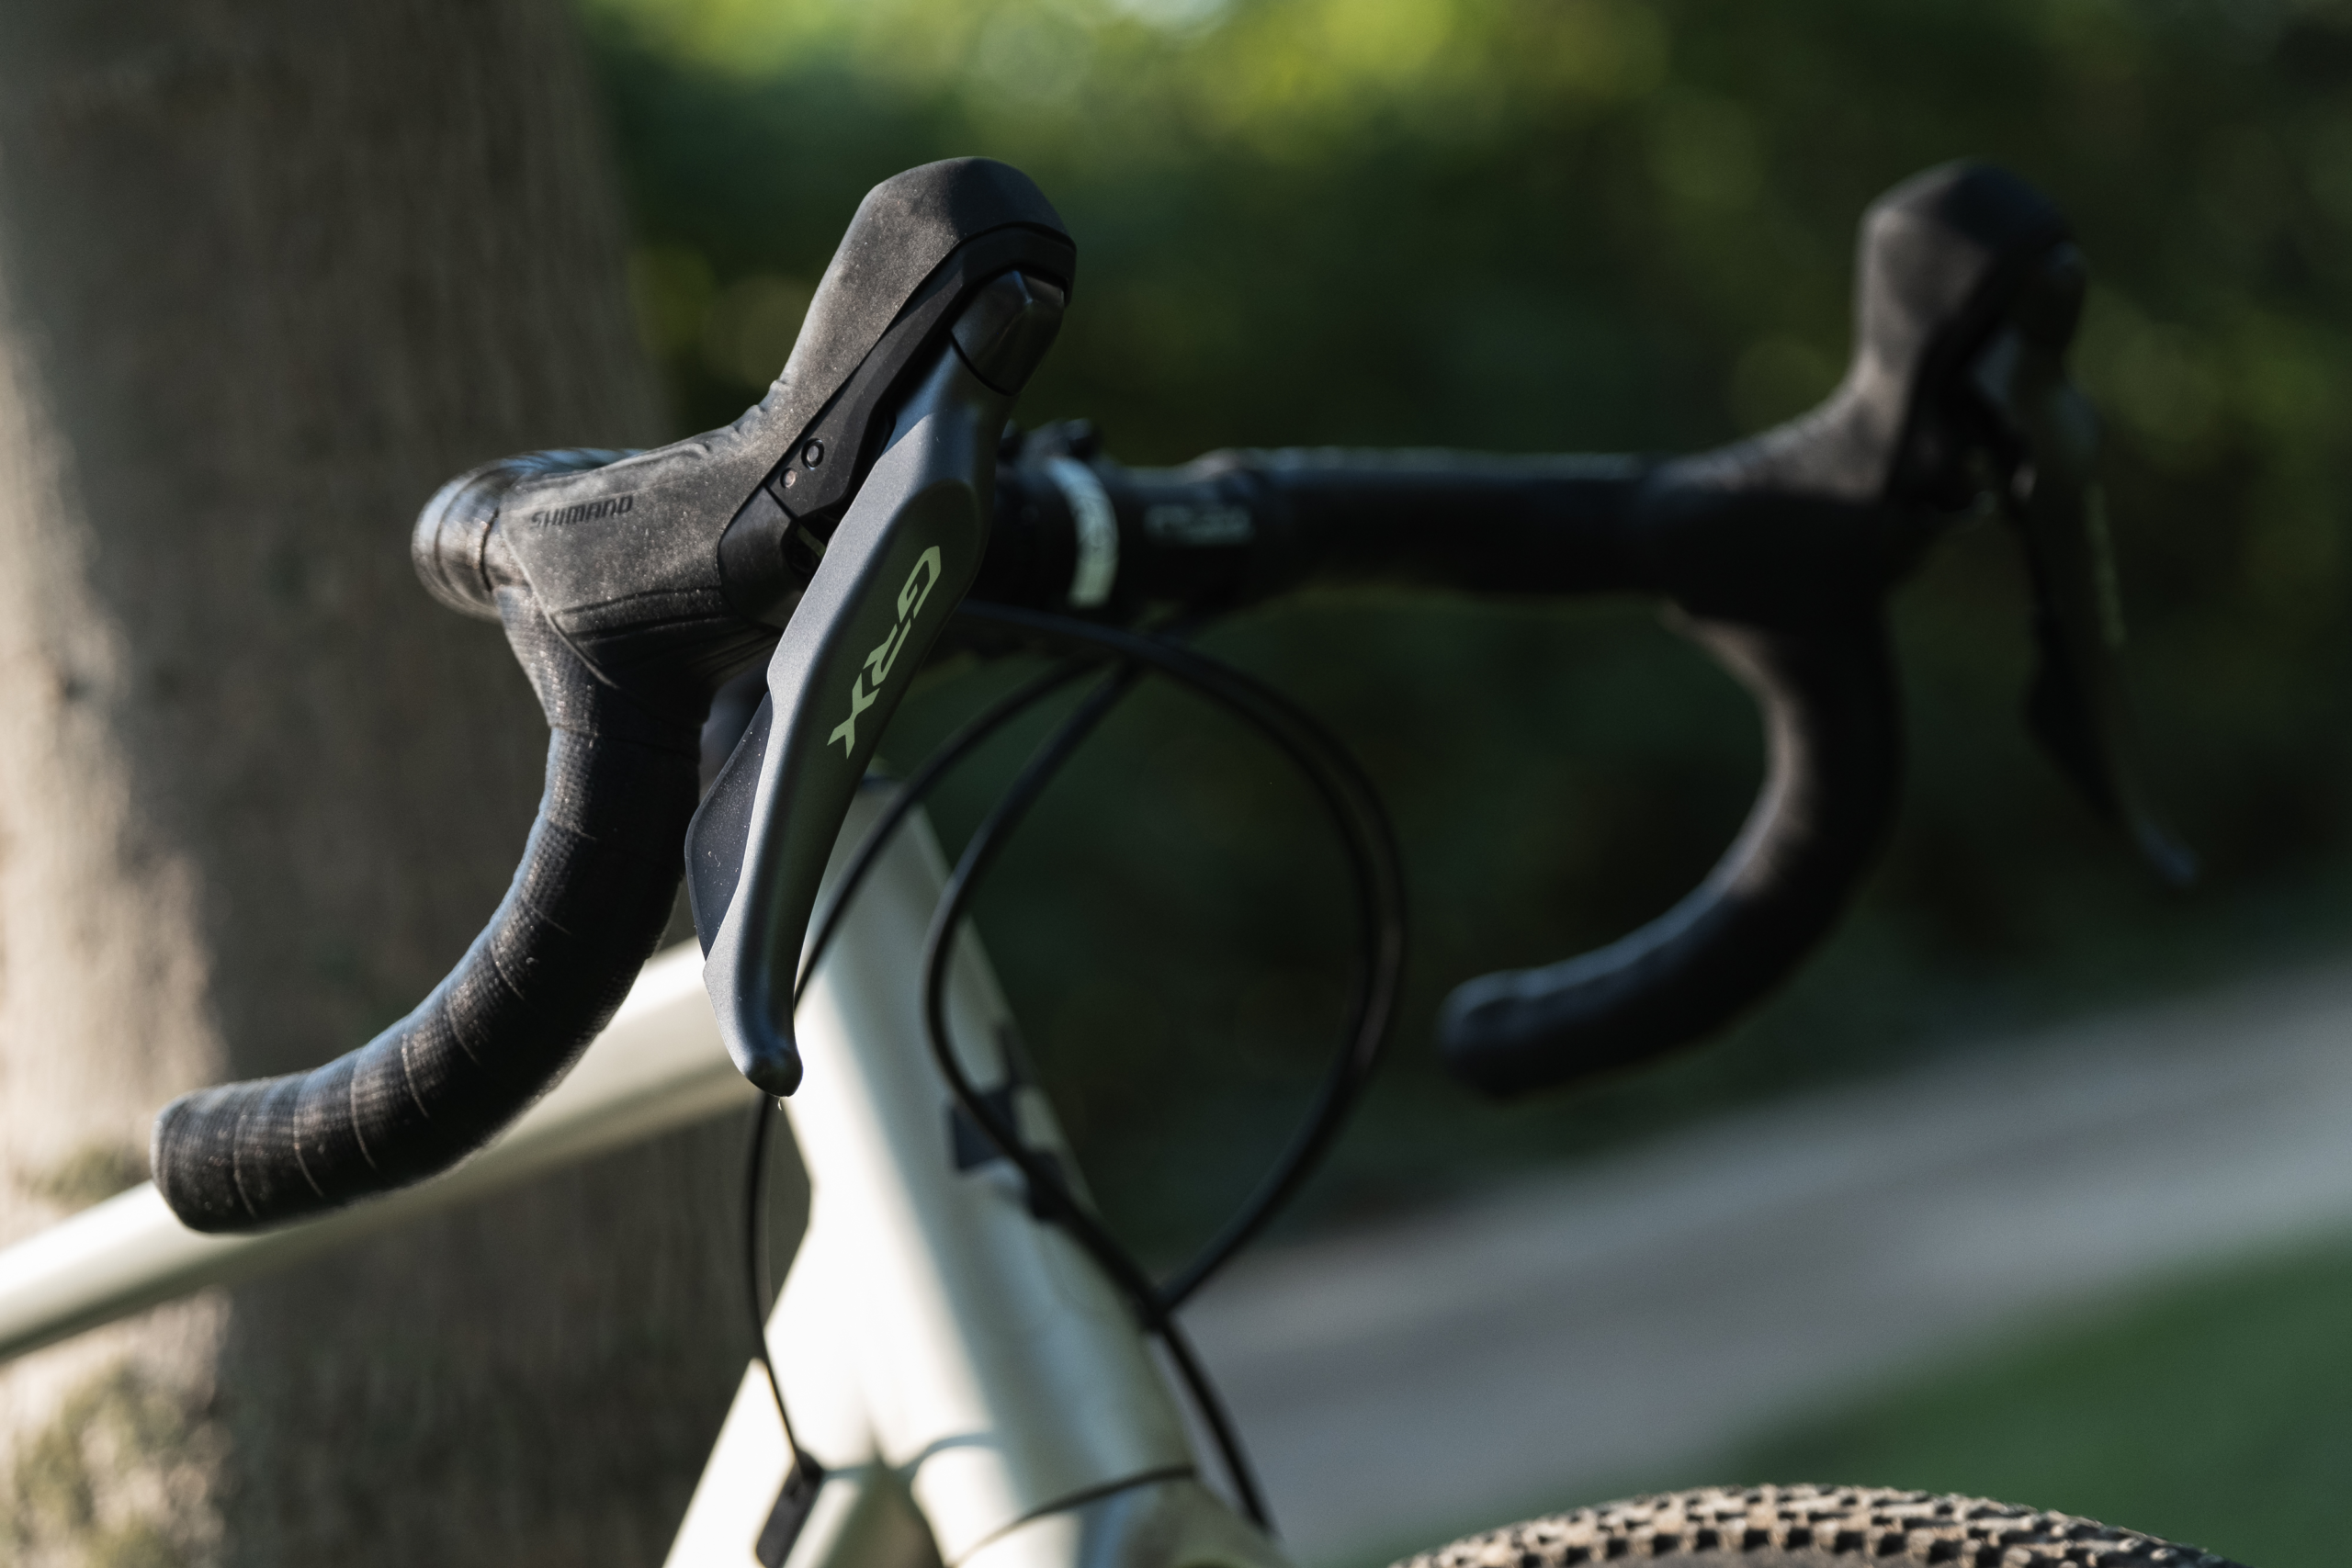 The new 12 speed Shimano GRX 820 shift levers